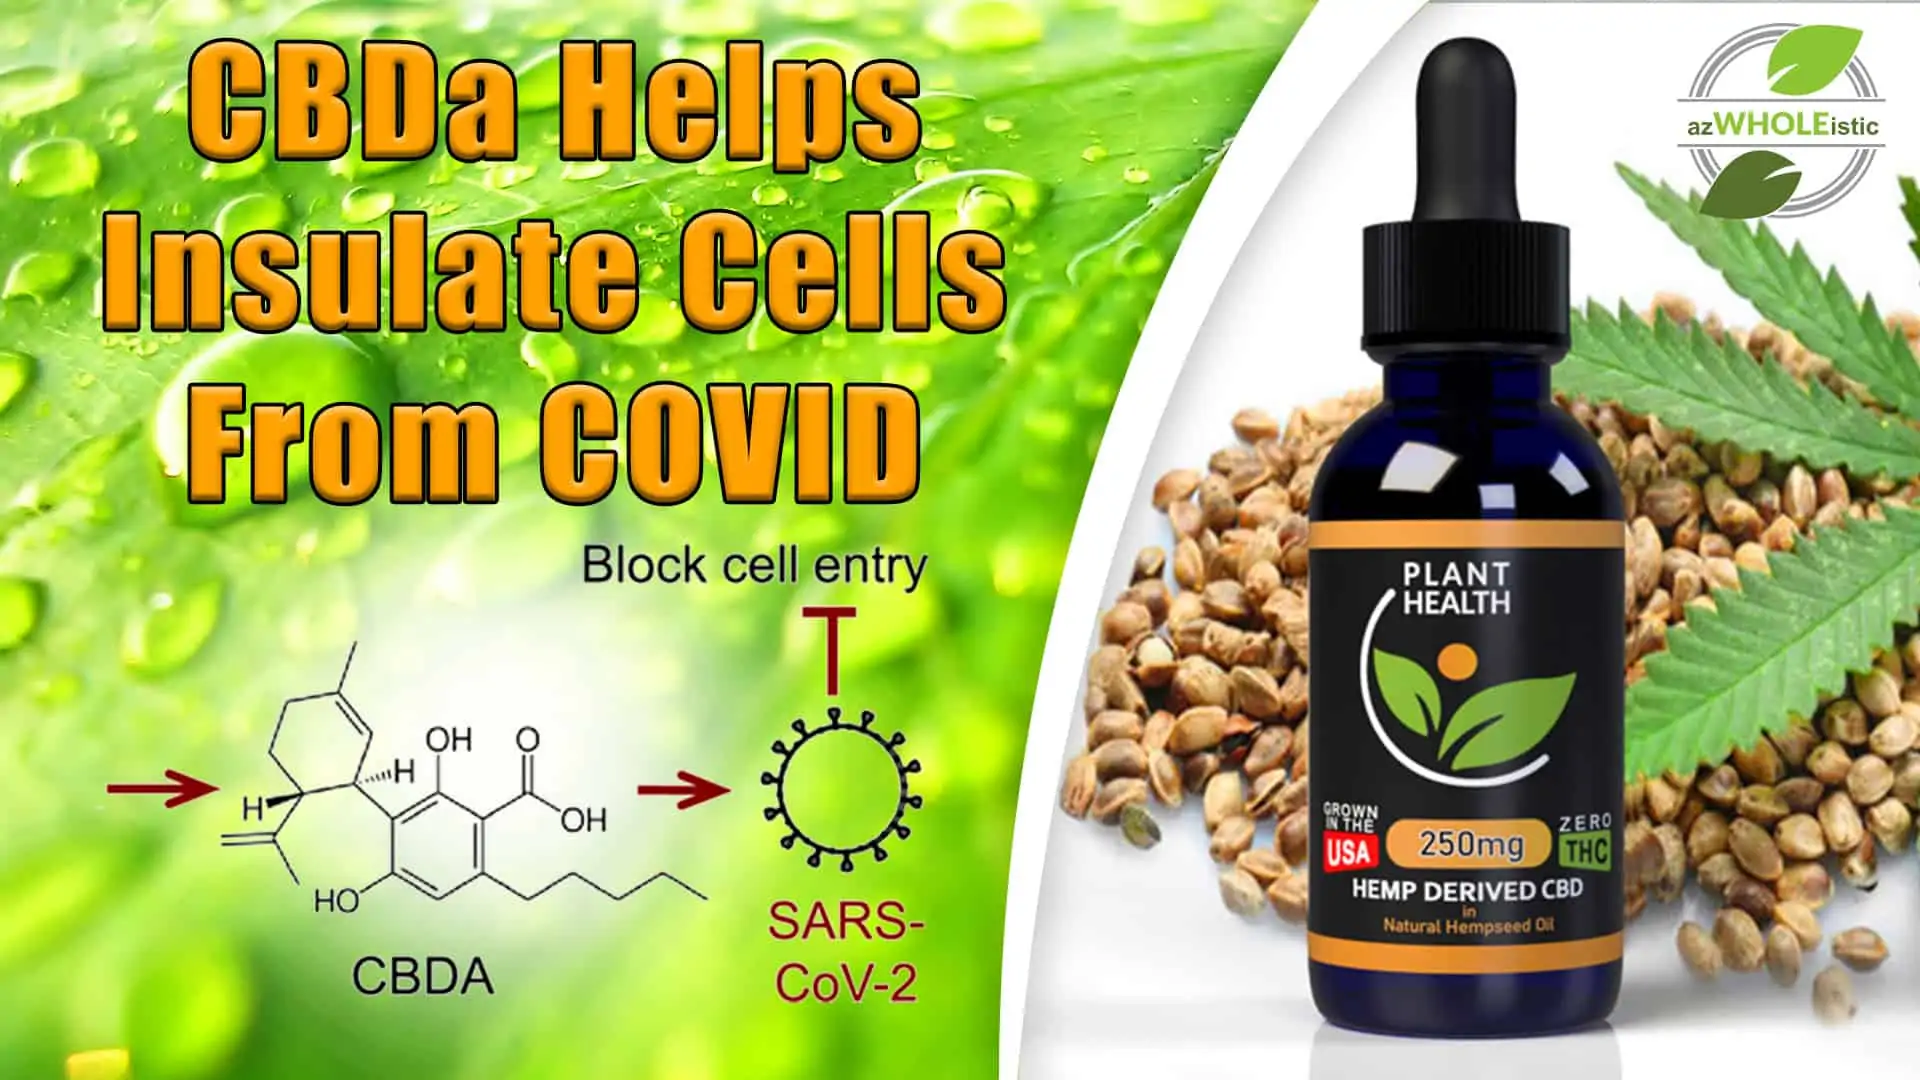 CBDA-HELPS-INSULATE-CELLS-FROM-COVID